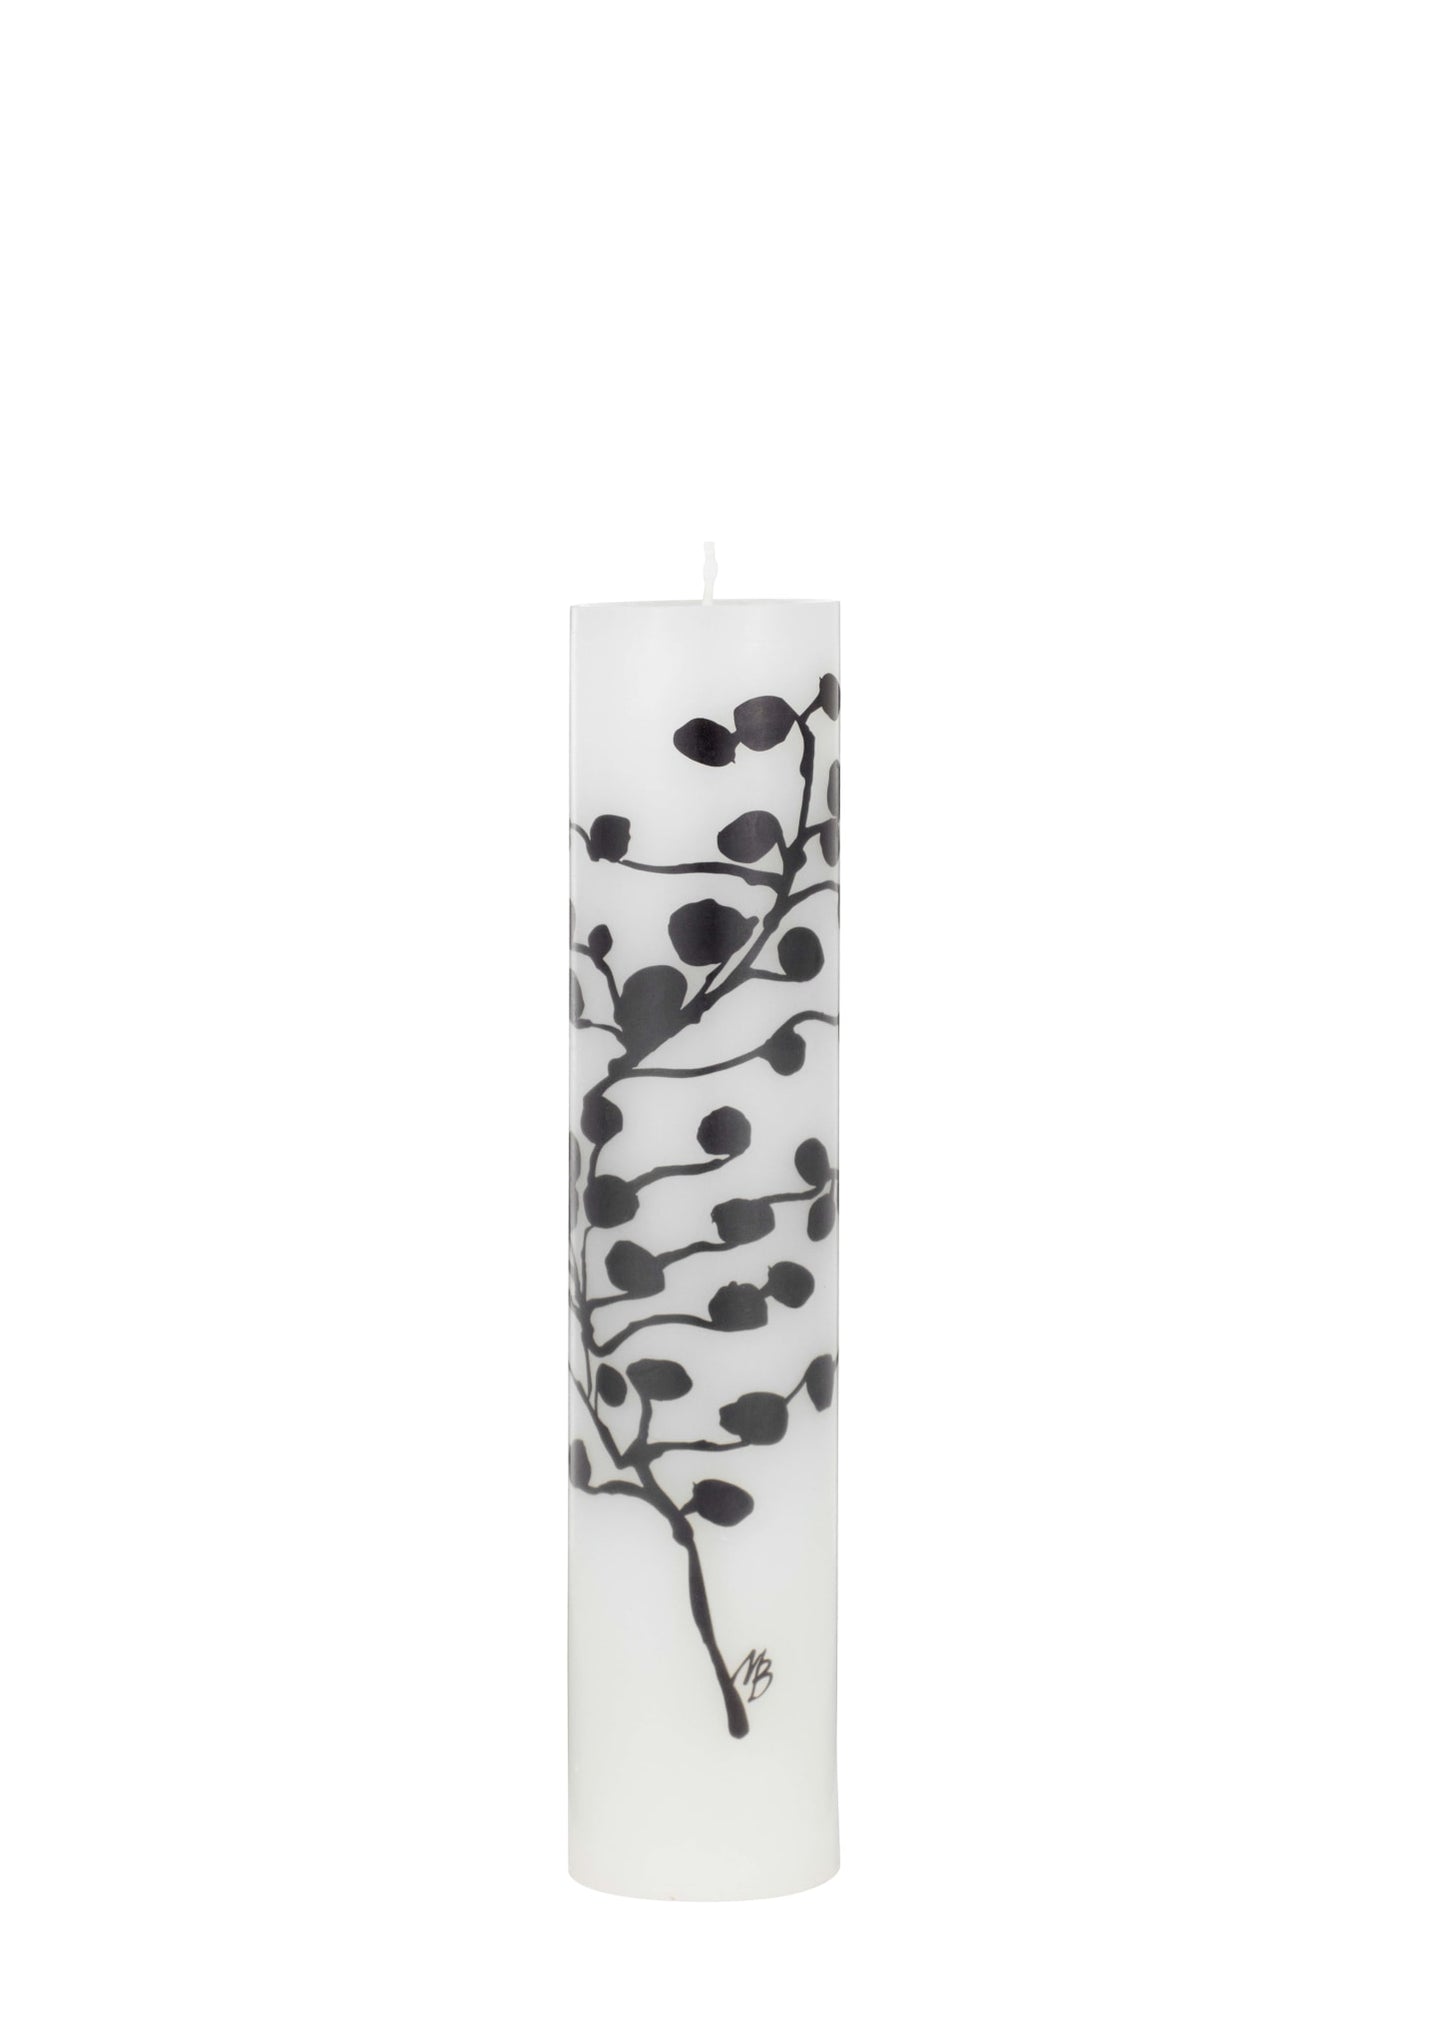 Abstract Flowers - Wild Flowers - Wax Altar Candles 6 cm x 30 cm - Black